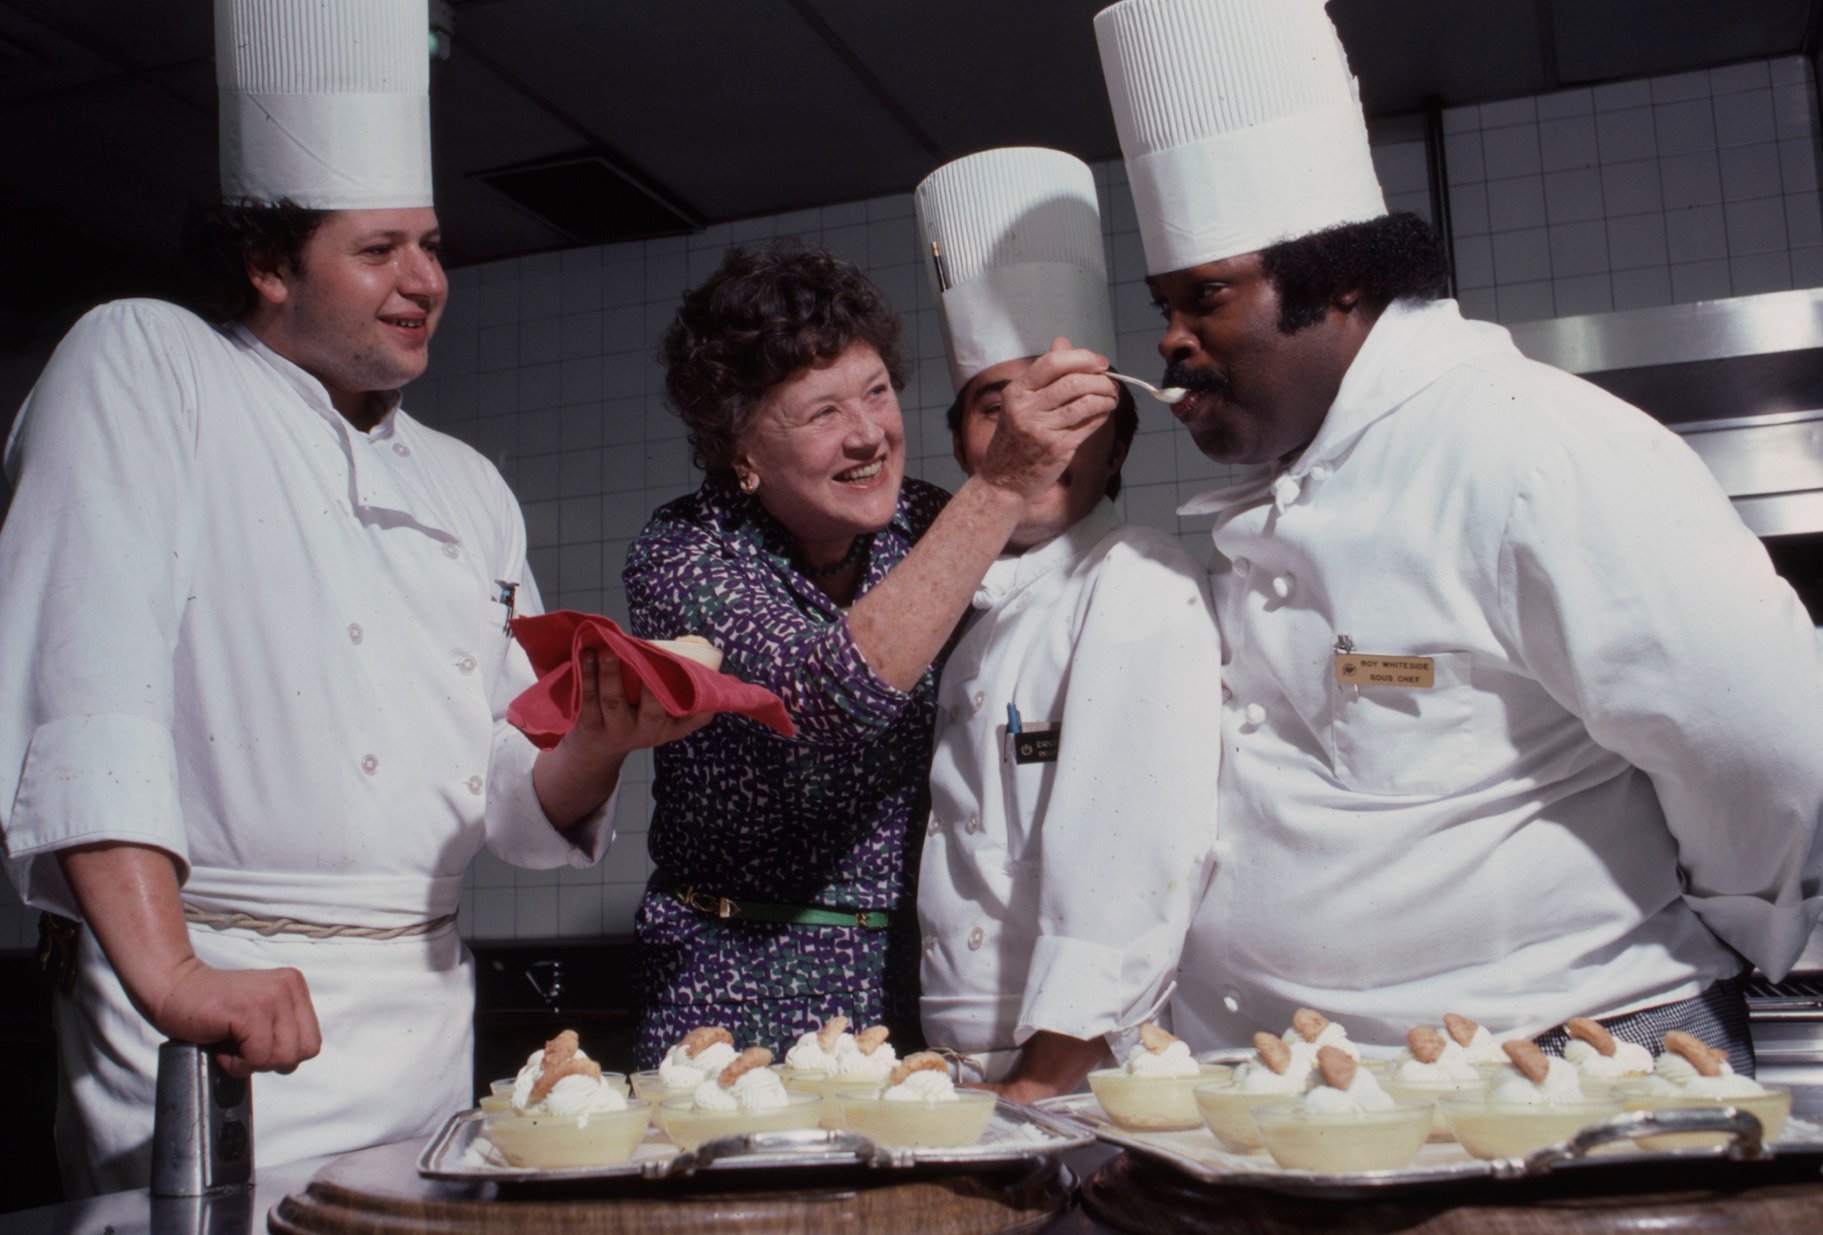 Julia Child is seen cooking with other chefs in 1979 